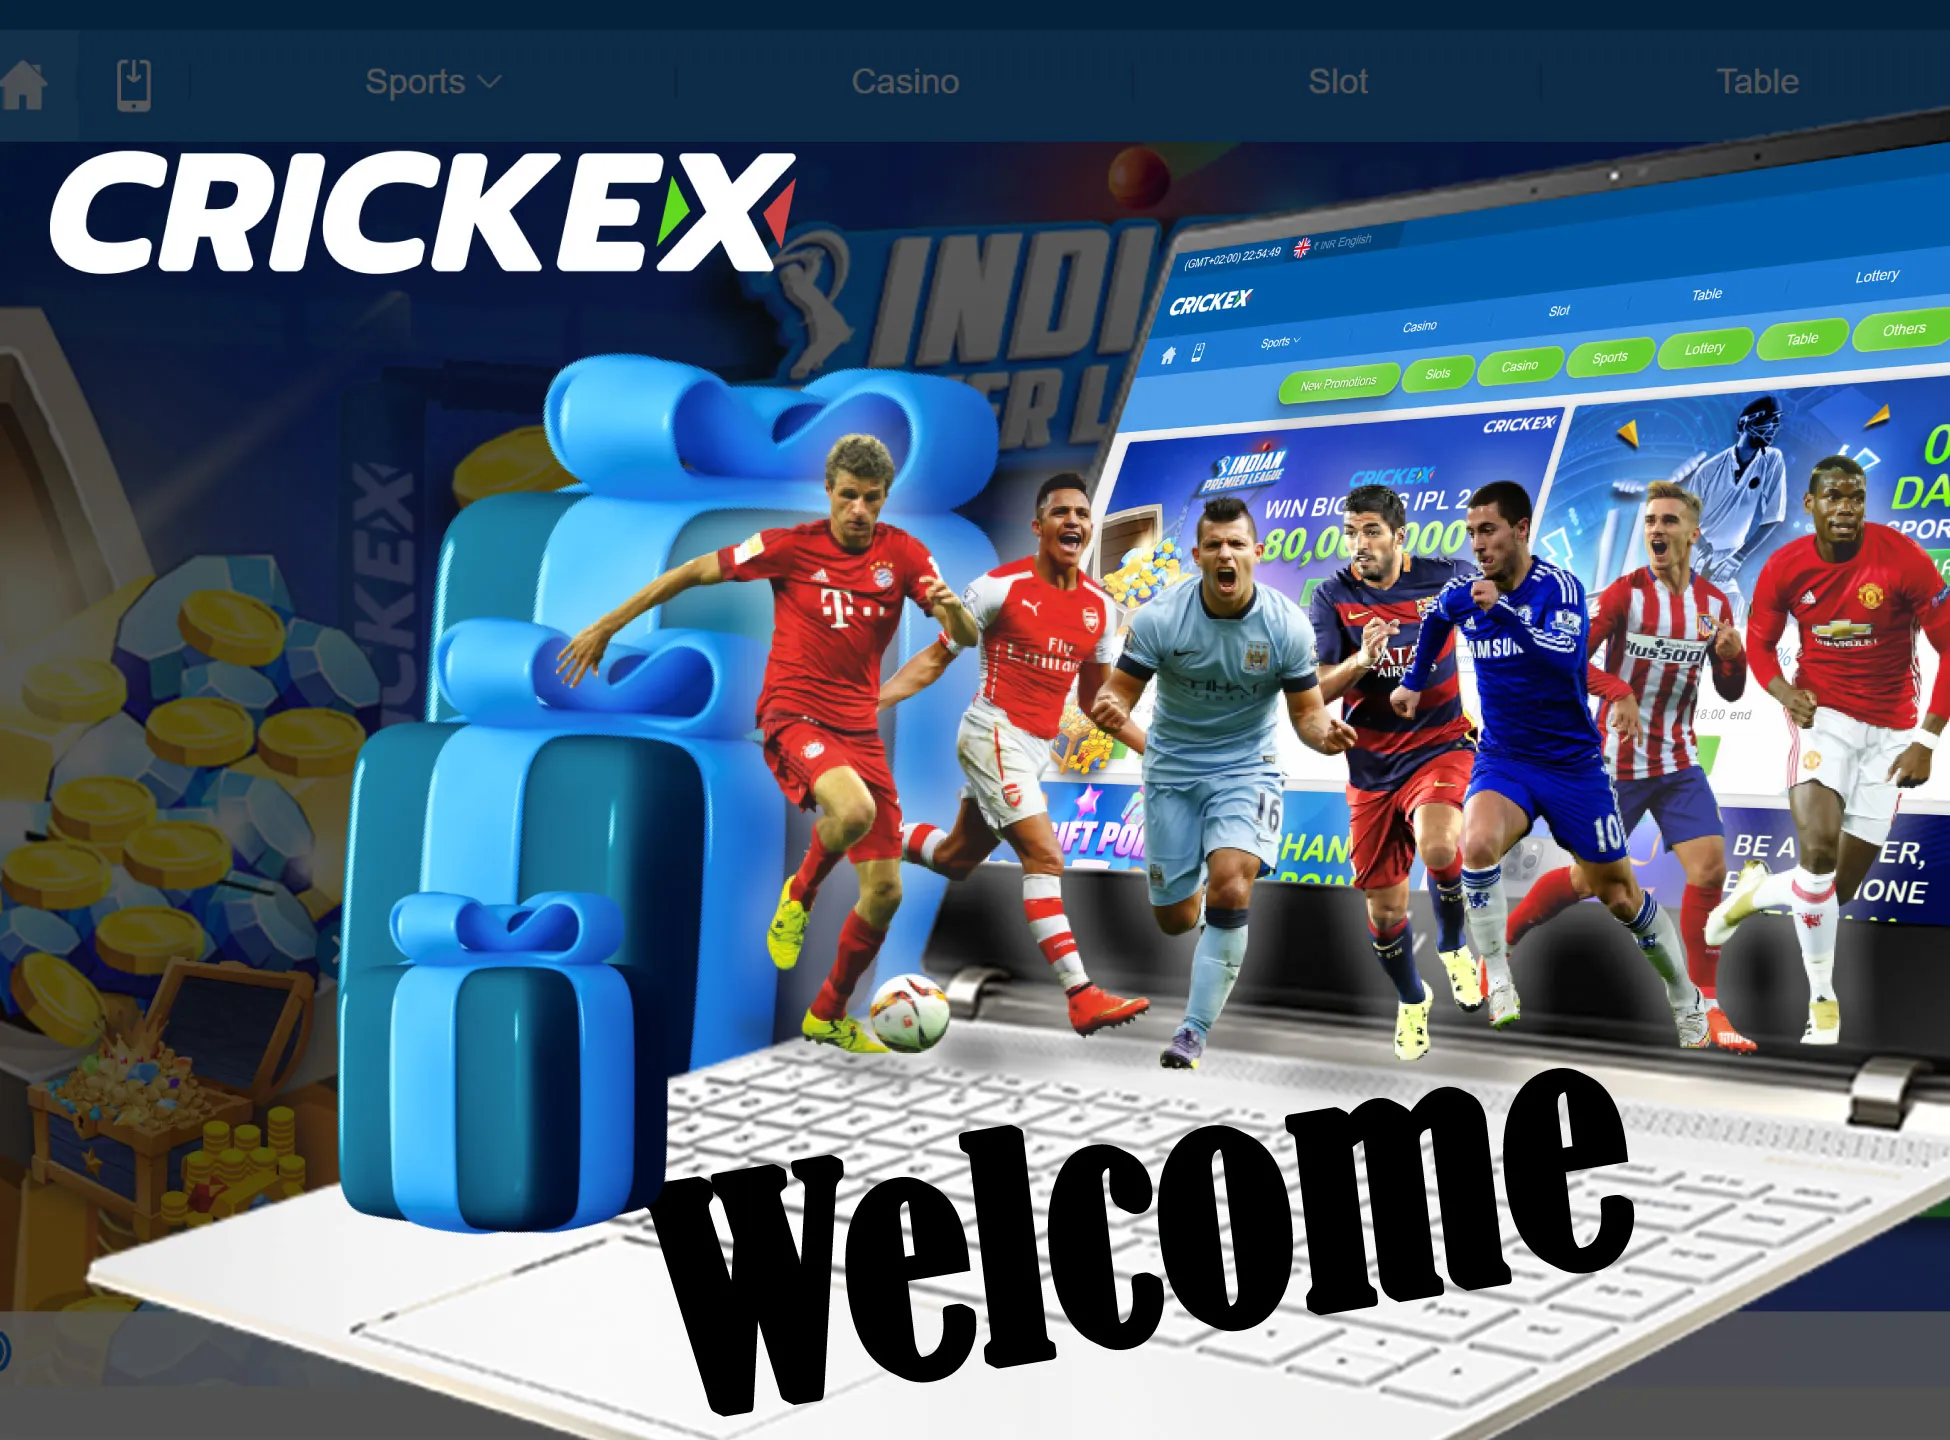 Crickex offers a special birthday bonus of up to 1000 INR.